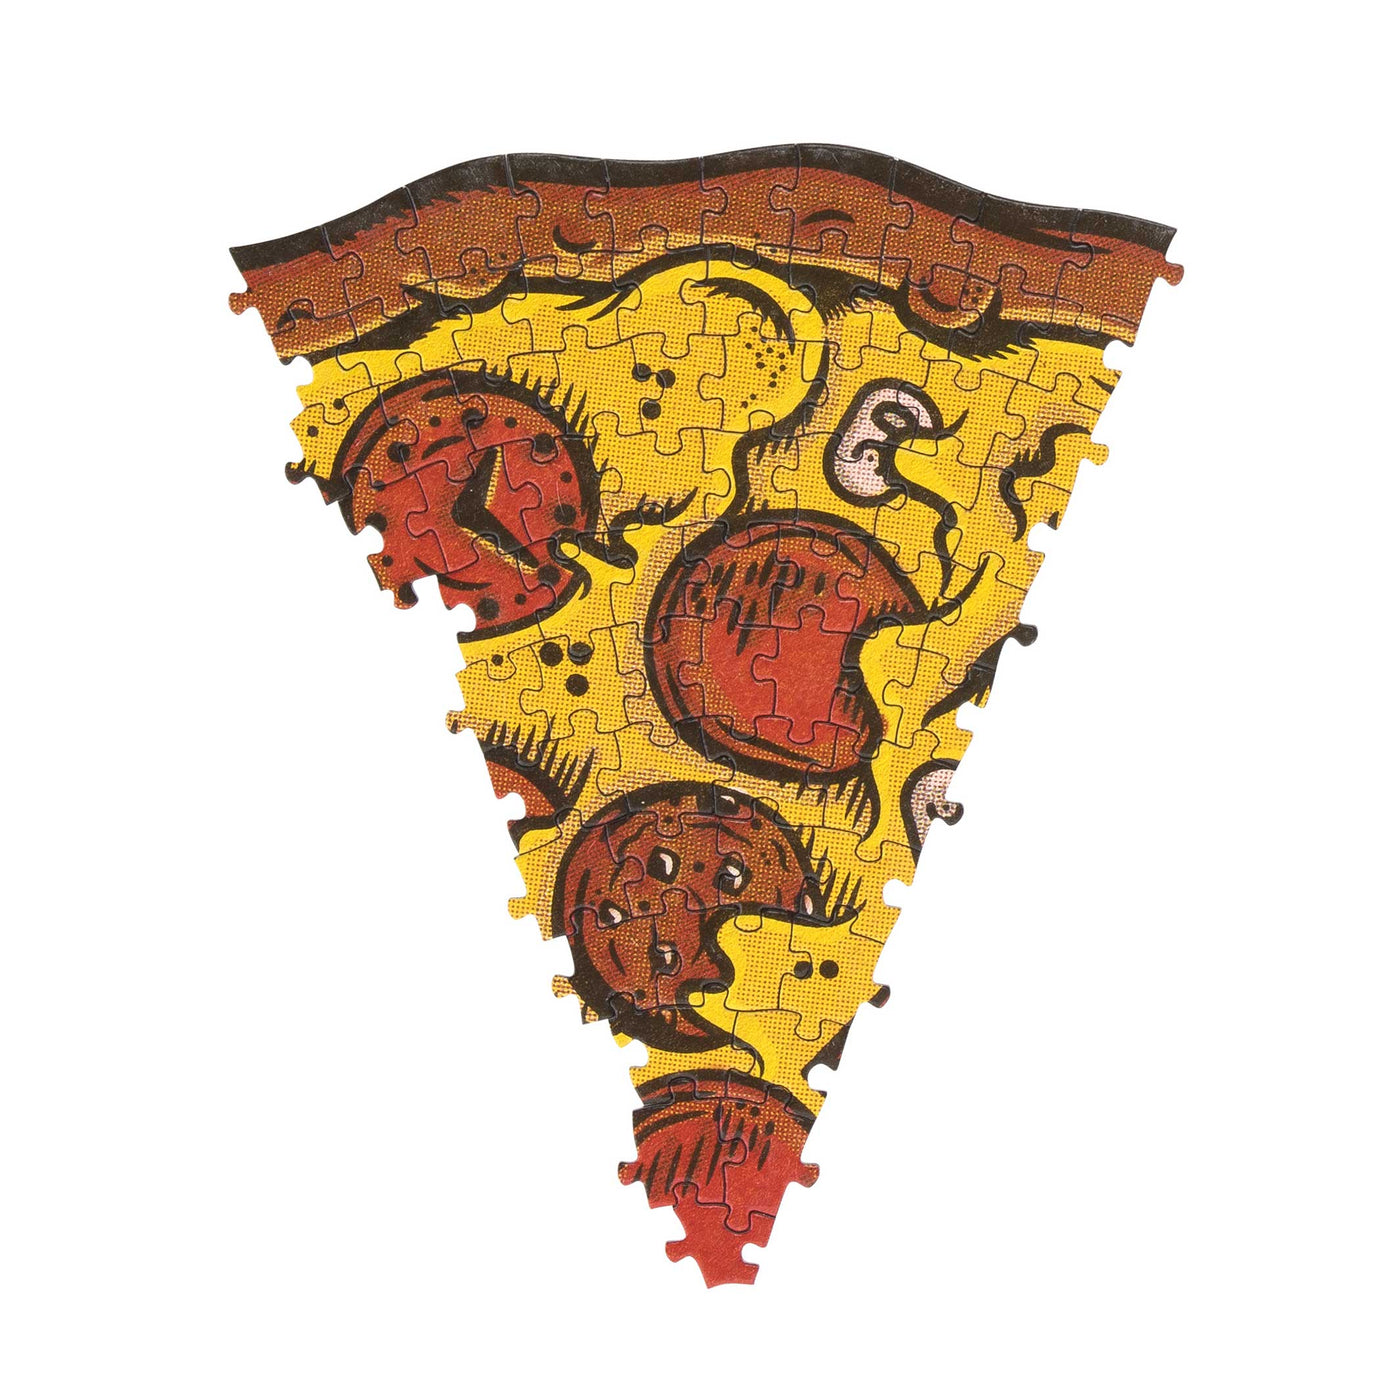 Single Slice of Pepperoni Pizza Puzzle Assembled